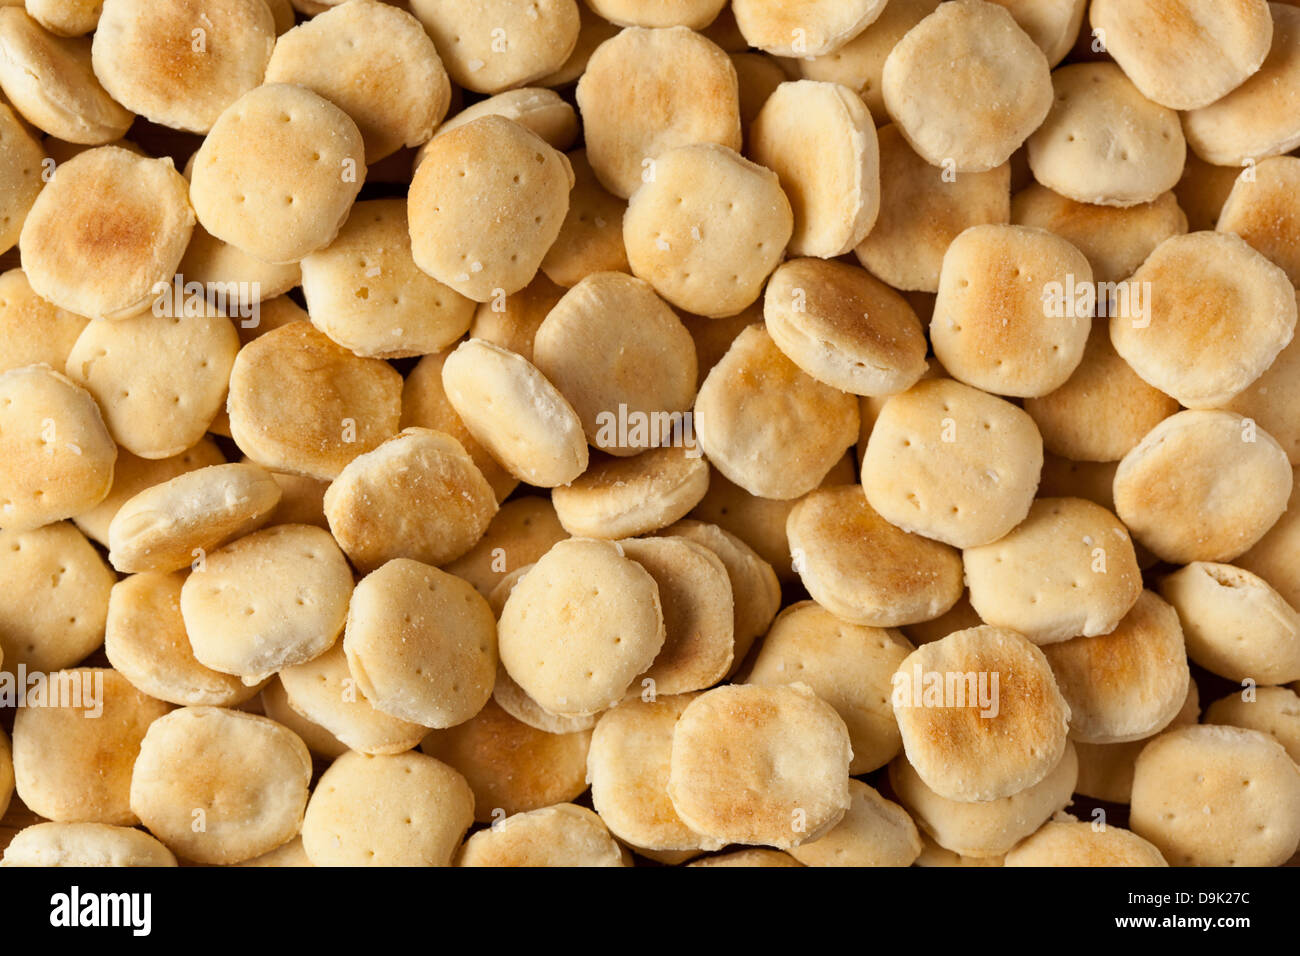 Organic Crunchy Oyster Crackers made with whole wheat Stock Photo